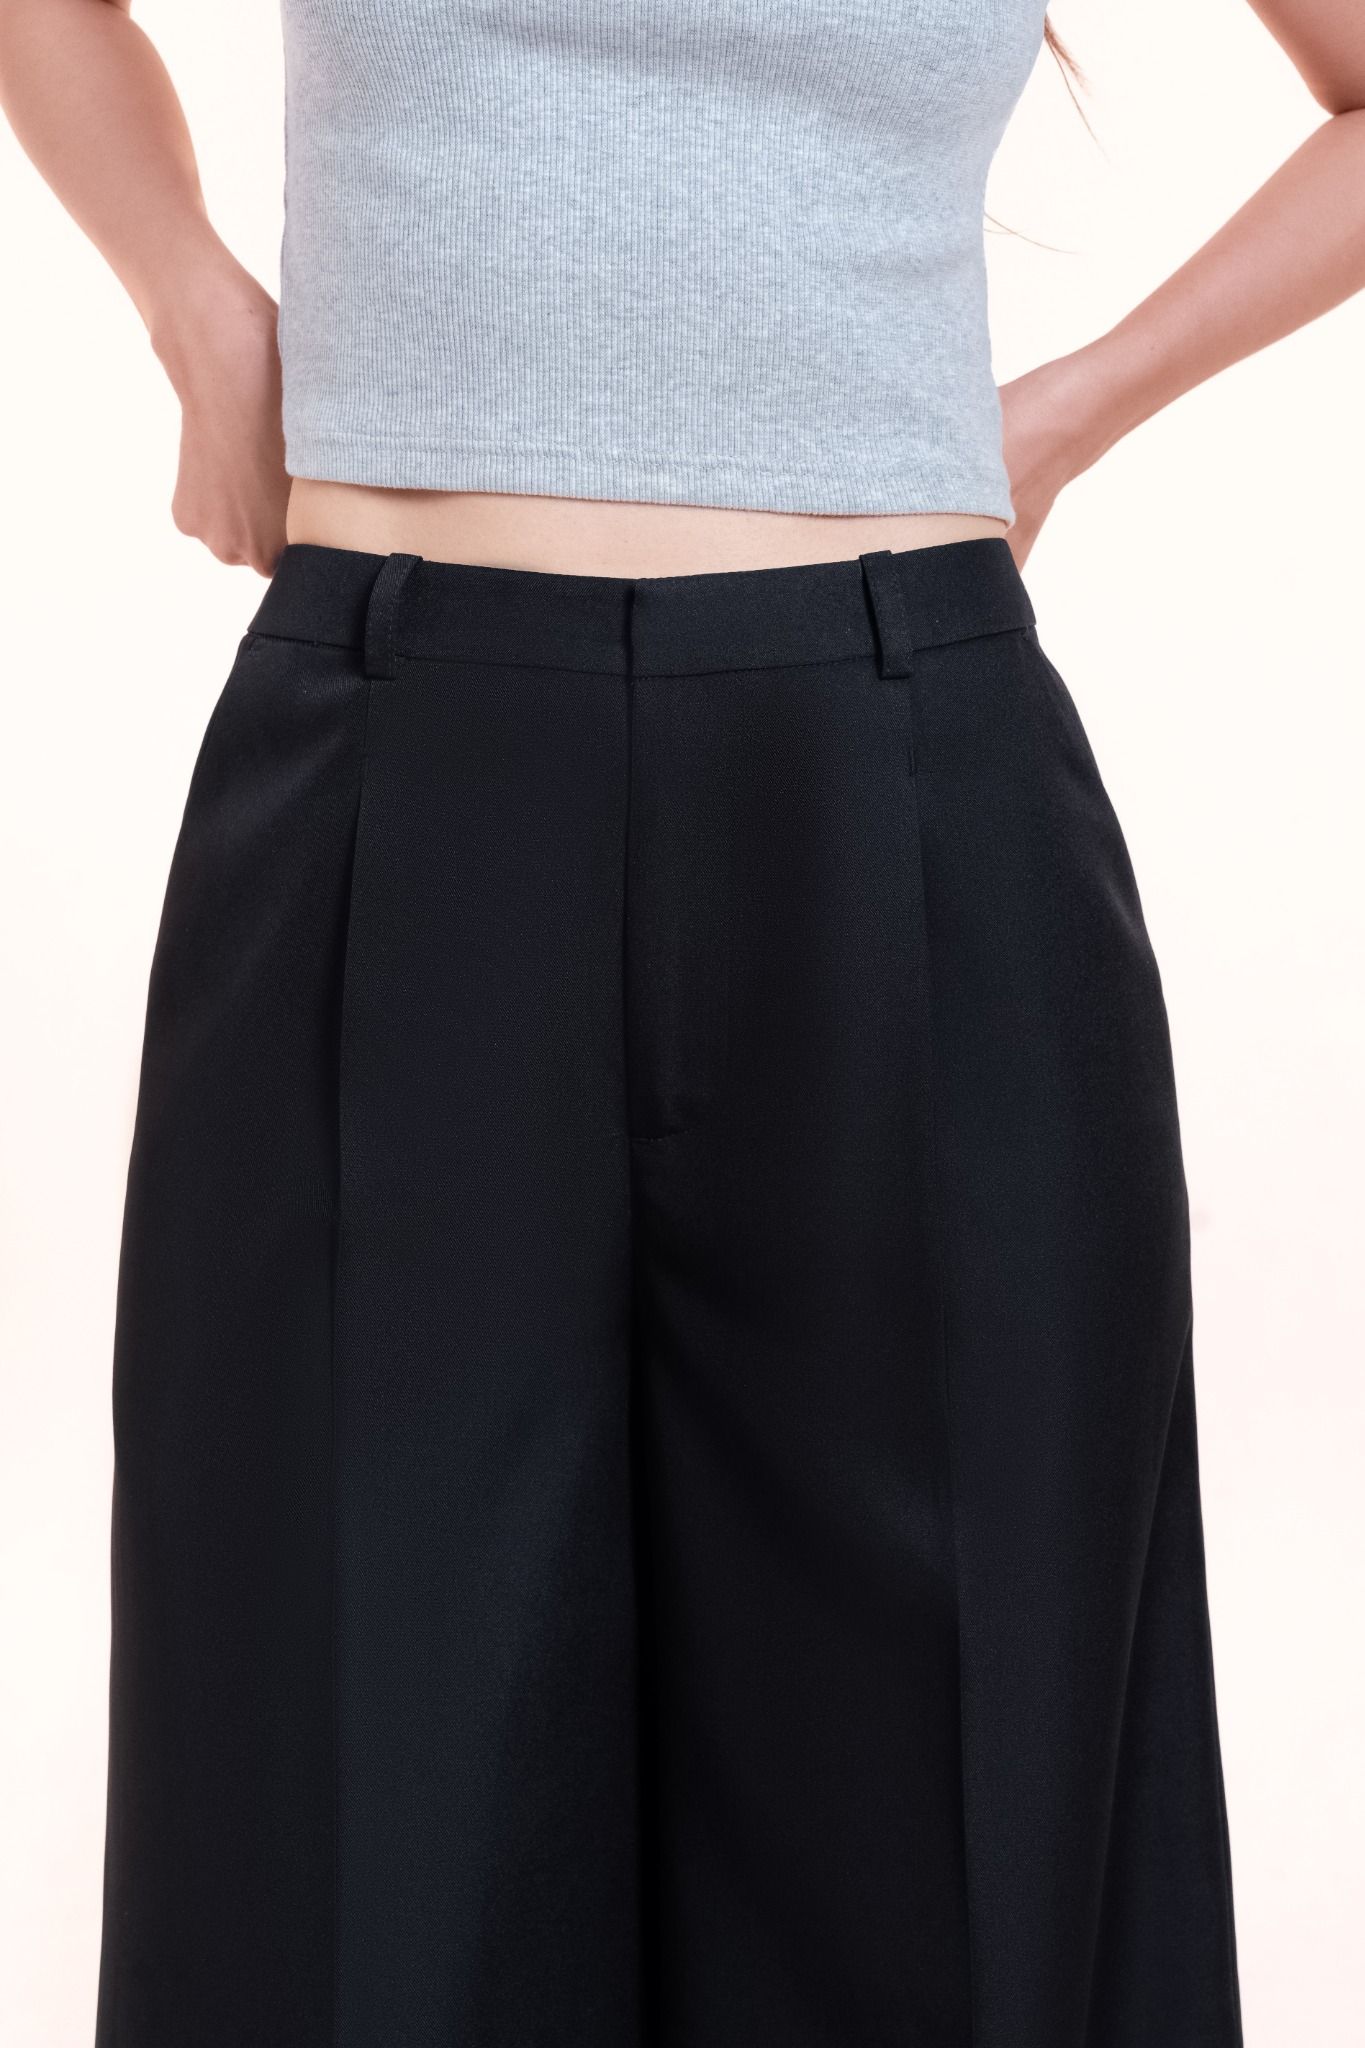  Black Tailored Wide Leg Trousers 